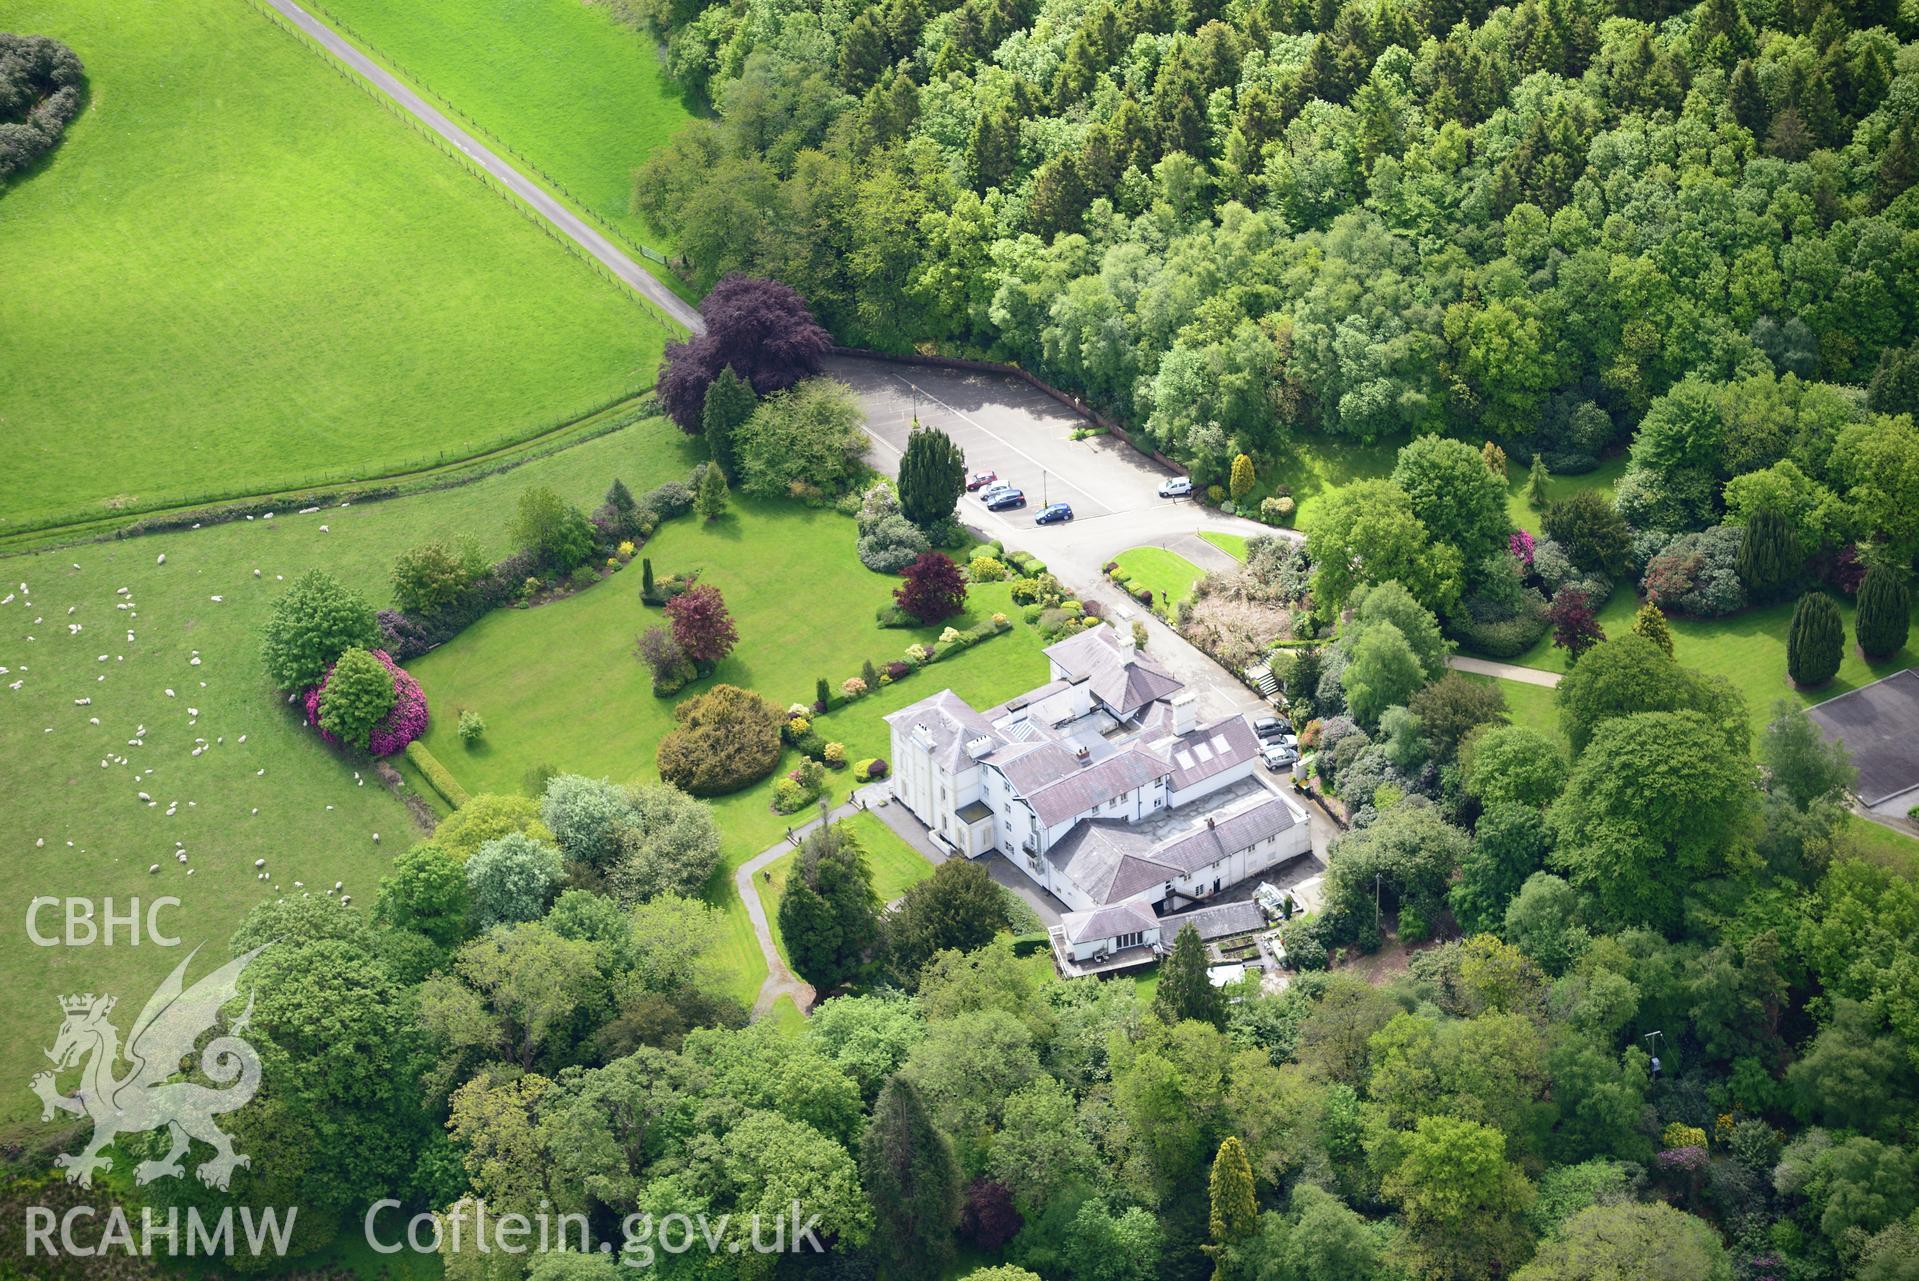 Falcondale mansion and garden, Lampeter. Oblique aerial photograph taken during the Royal Commission's programme of archaeological aerial reconnaissance by Toby Driver on 3rd June 2015.